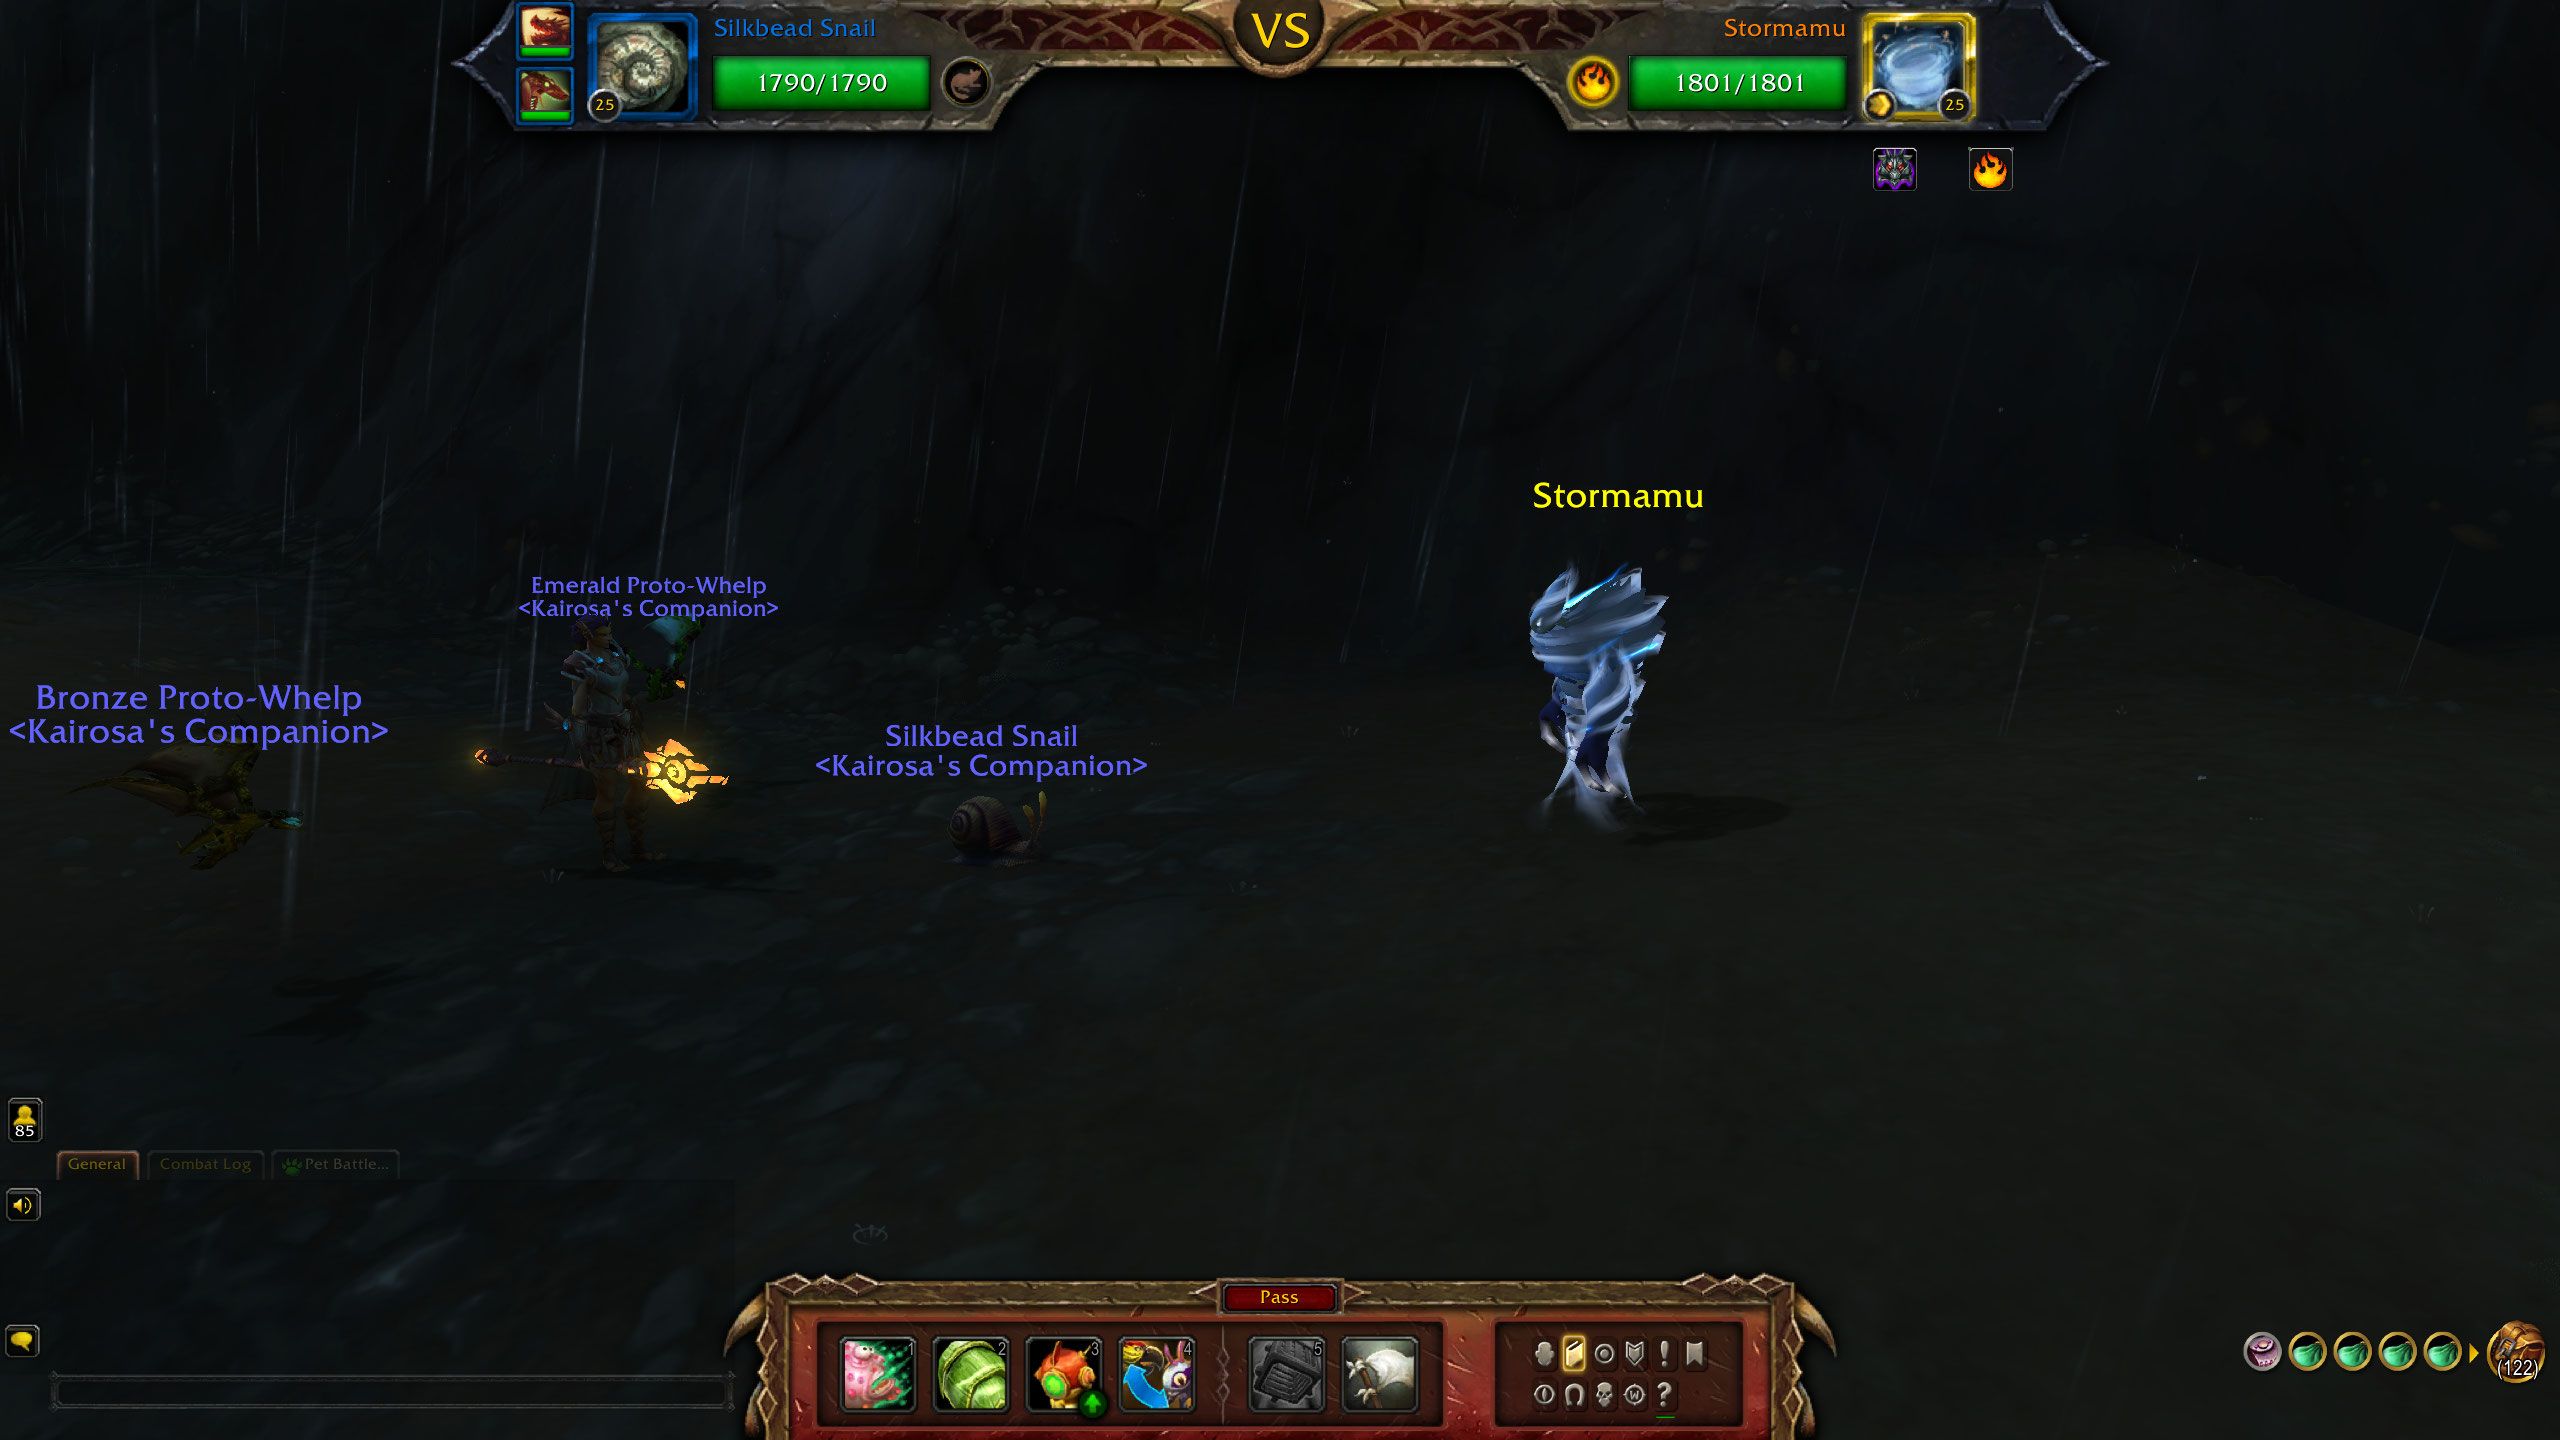 WoW pet battle against Stormamu with silkbead snail, bronze proto-whelp, and emerald proto-whelp